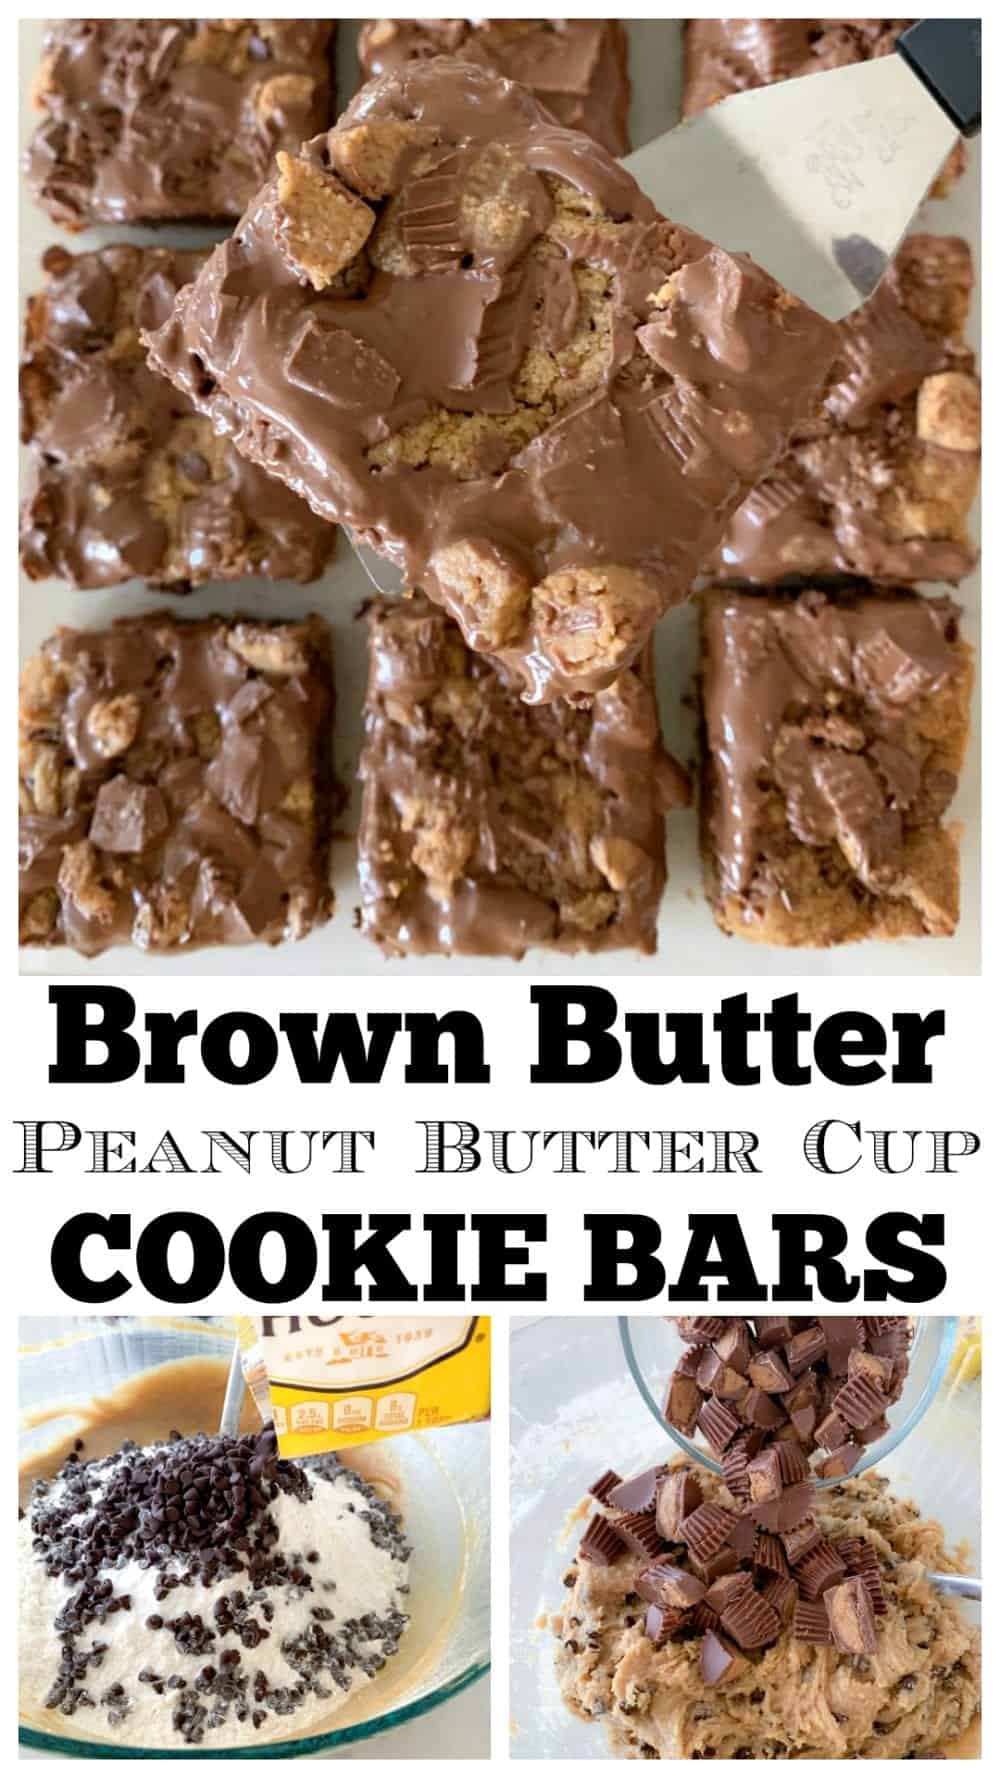 Brown Butter Peanut Butter Cups Cookie Bars | Picky Palate